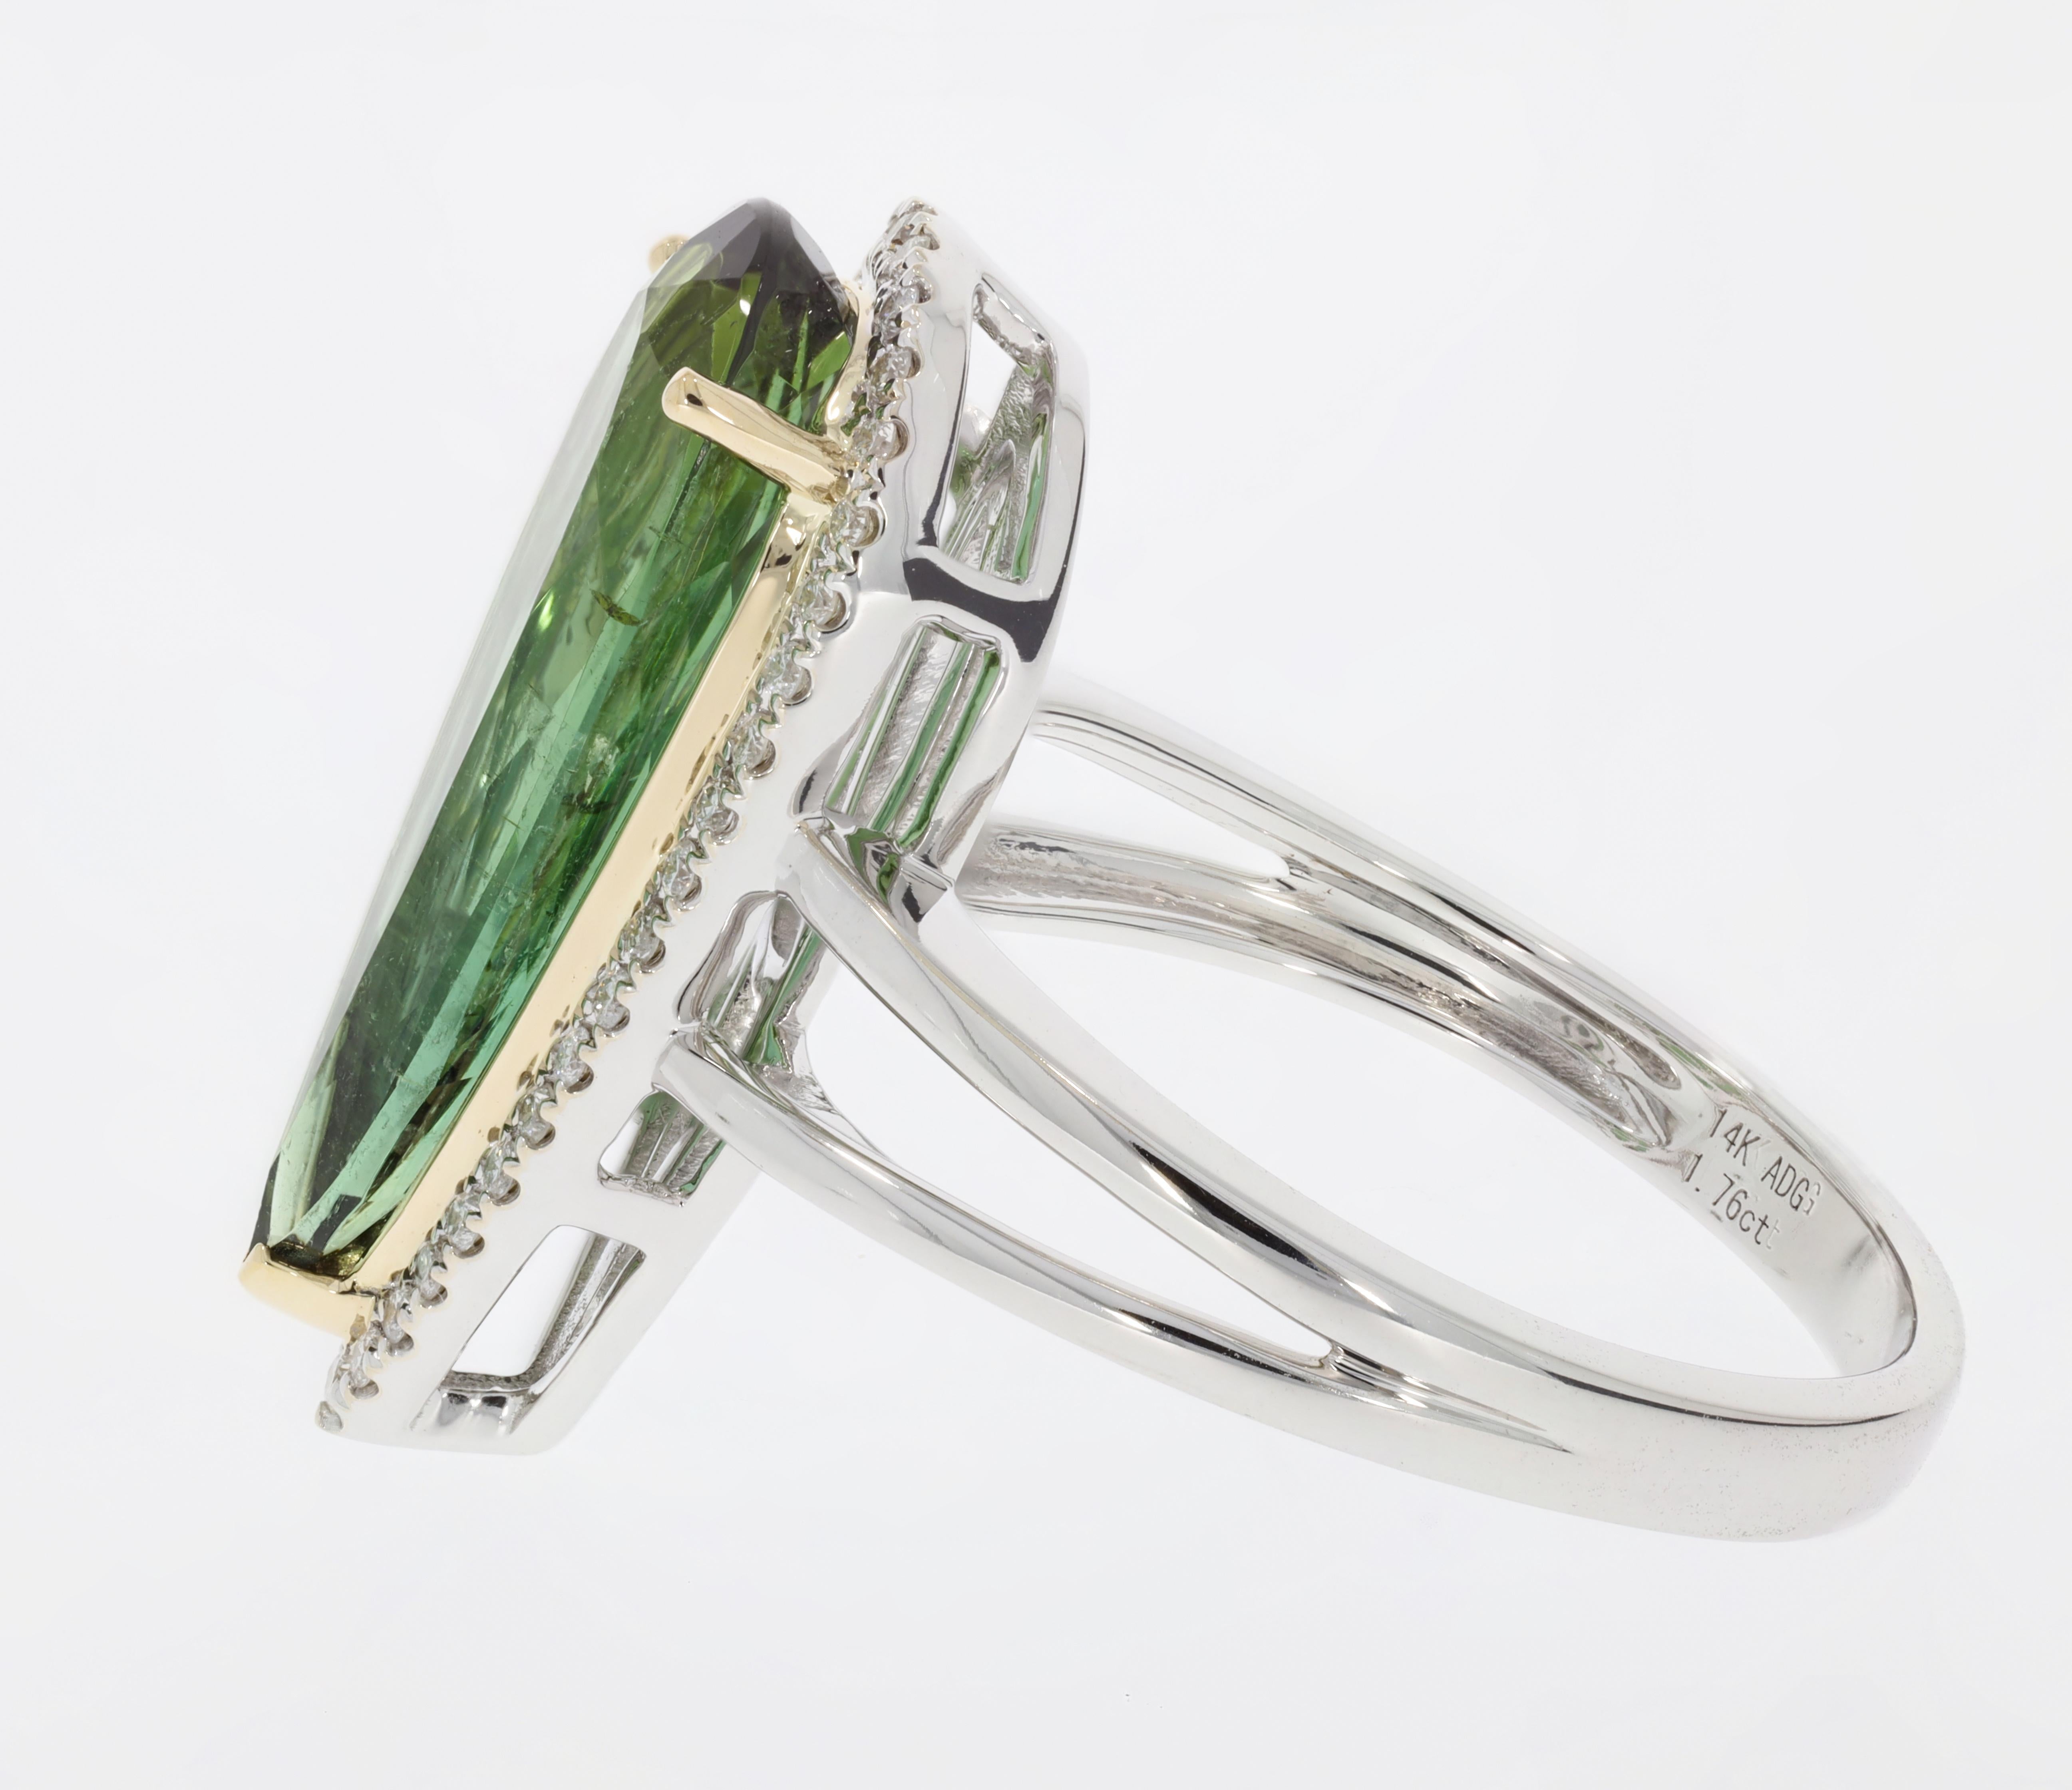 This bright green Tourmaline is reminiscent of Mozambique Paraiba Tourmaline, with its vibrant color and magnificent cutting. The gorgeous ring is accented with 0.15 ct of Diamonds and set in two-tone white and yellow gold. 